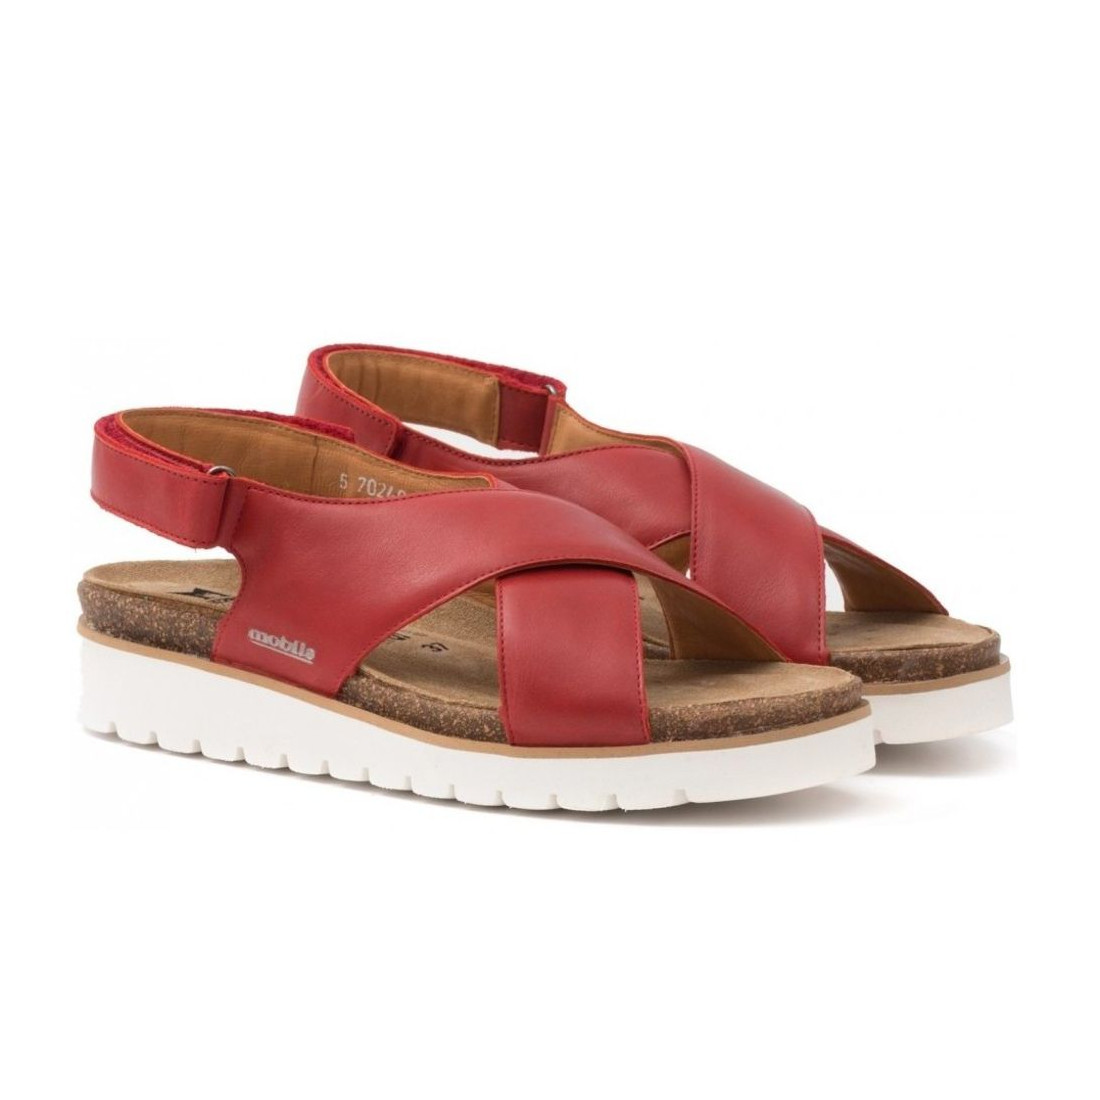 Buy > mephisto red sandals > in stock